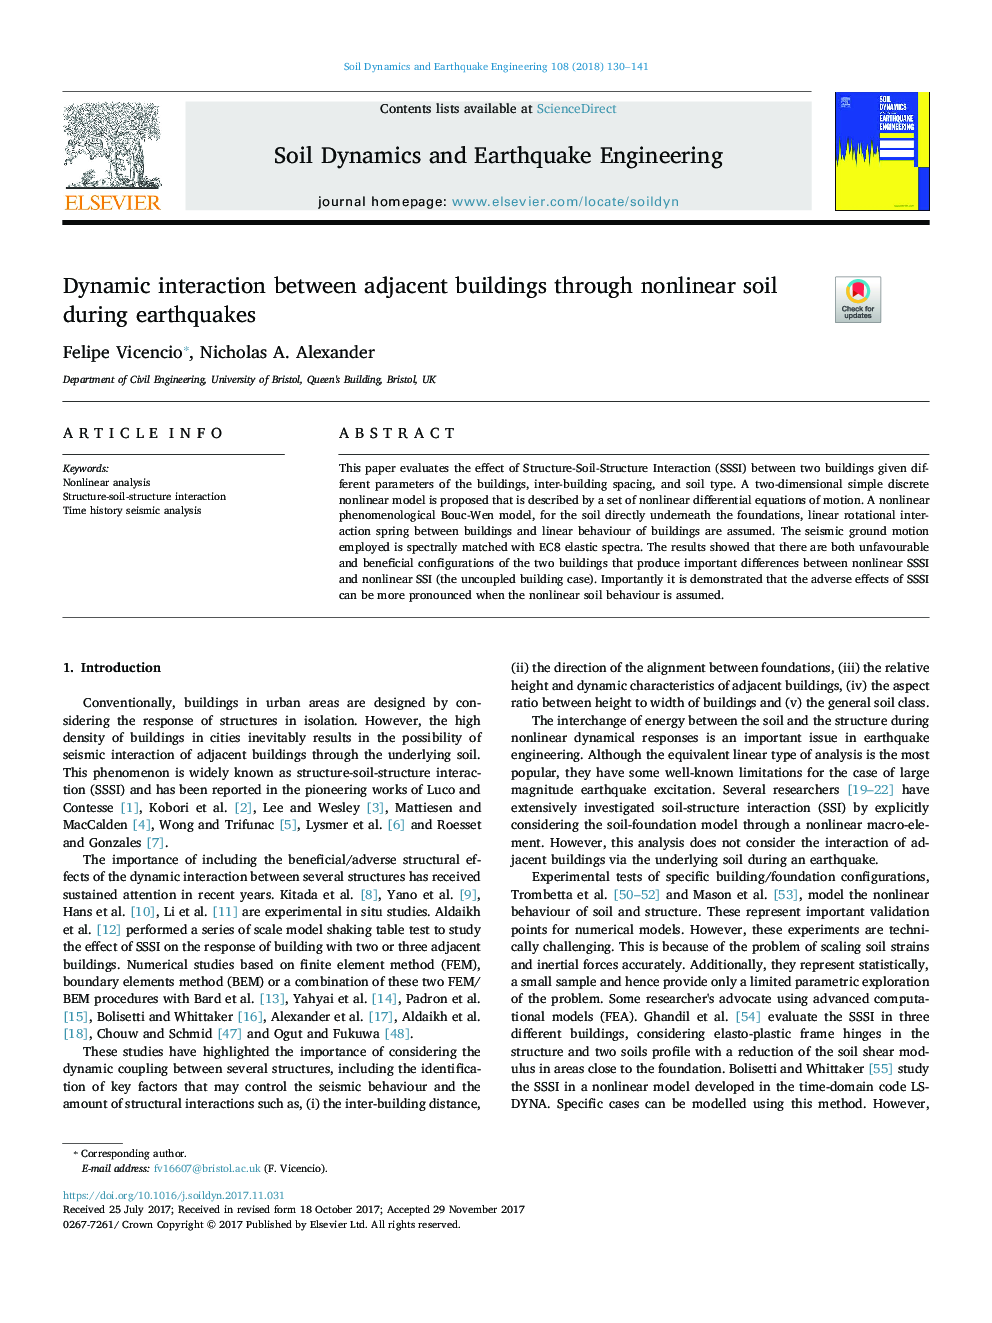 Dynamic interaction between adjacent buildings through nonlinear soil during earthquakes